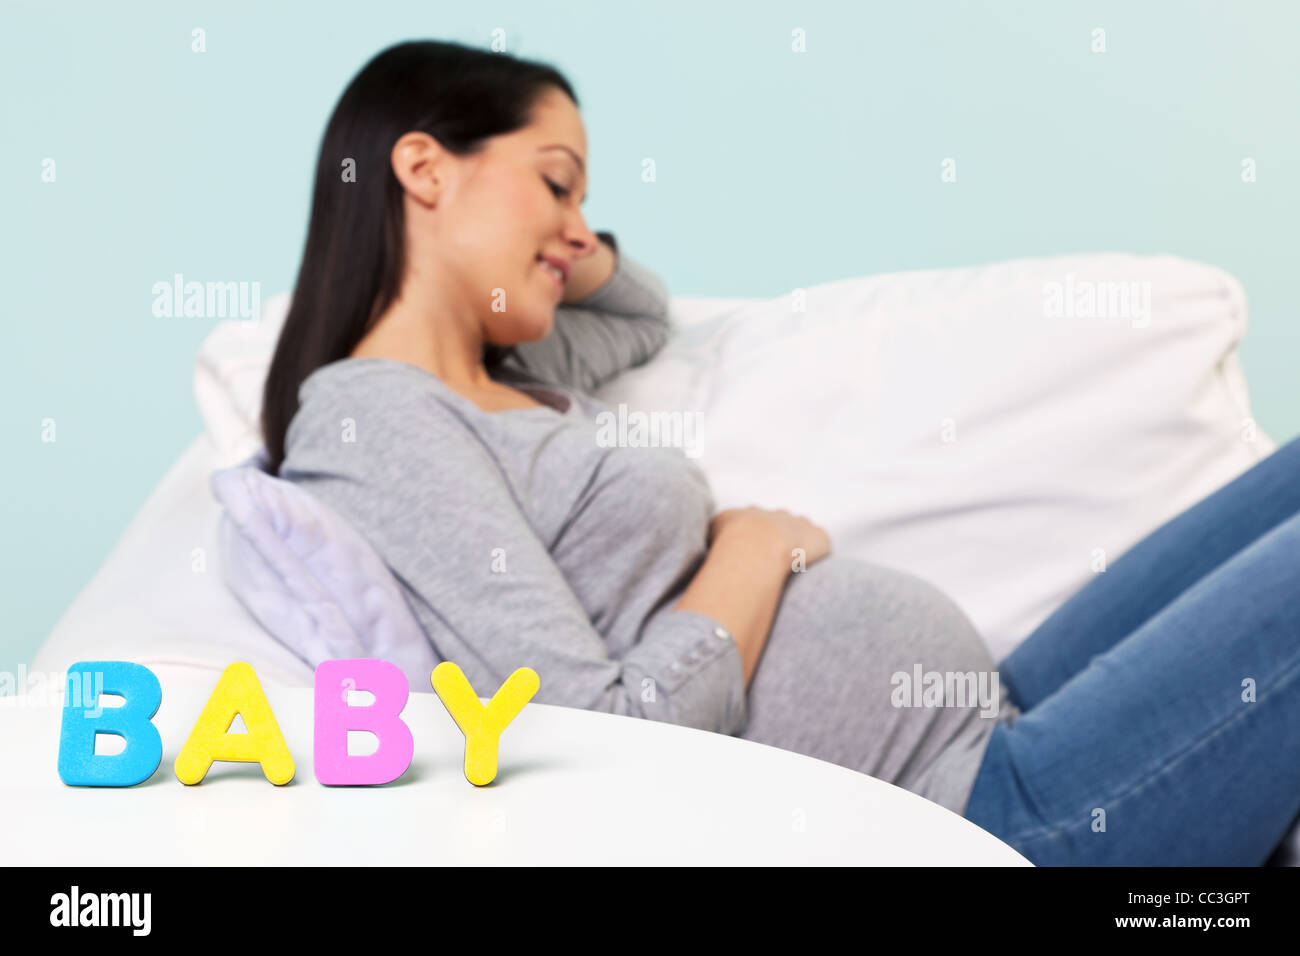 Photo of a pregnant woman at home sitting in an armchair, focus on the word BABY on the table in front. Stock Photo